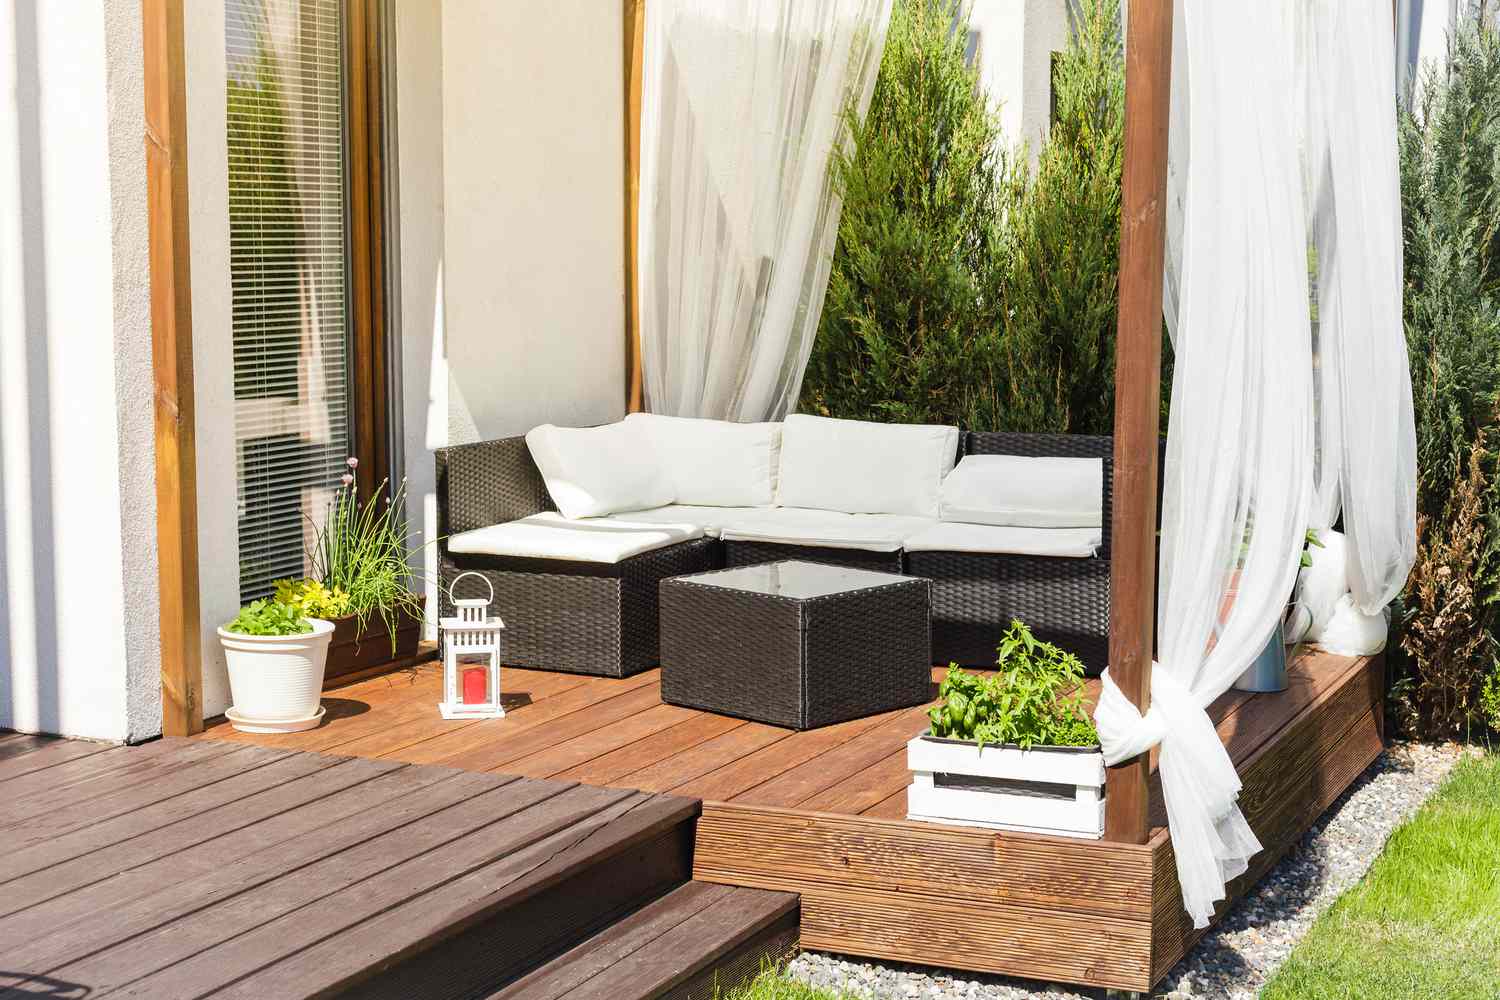 How To Close In An Outdoor Patio